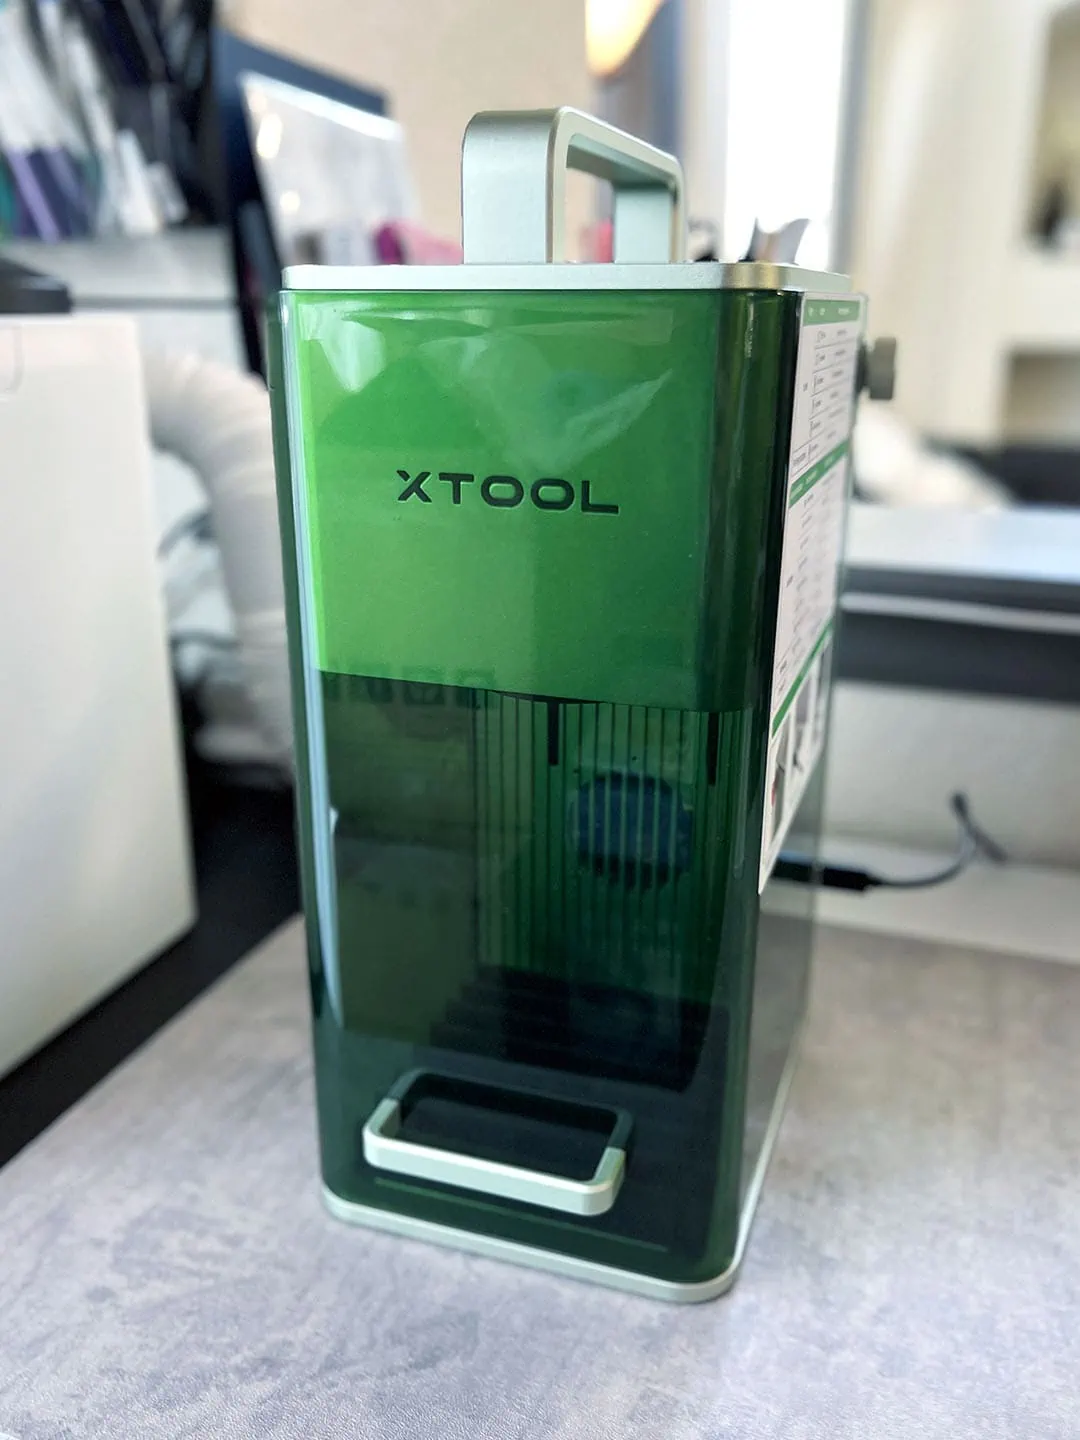 xTool F1 Portable RI and Diode Laser Engraver - Get Started Guide